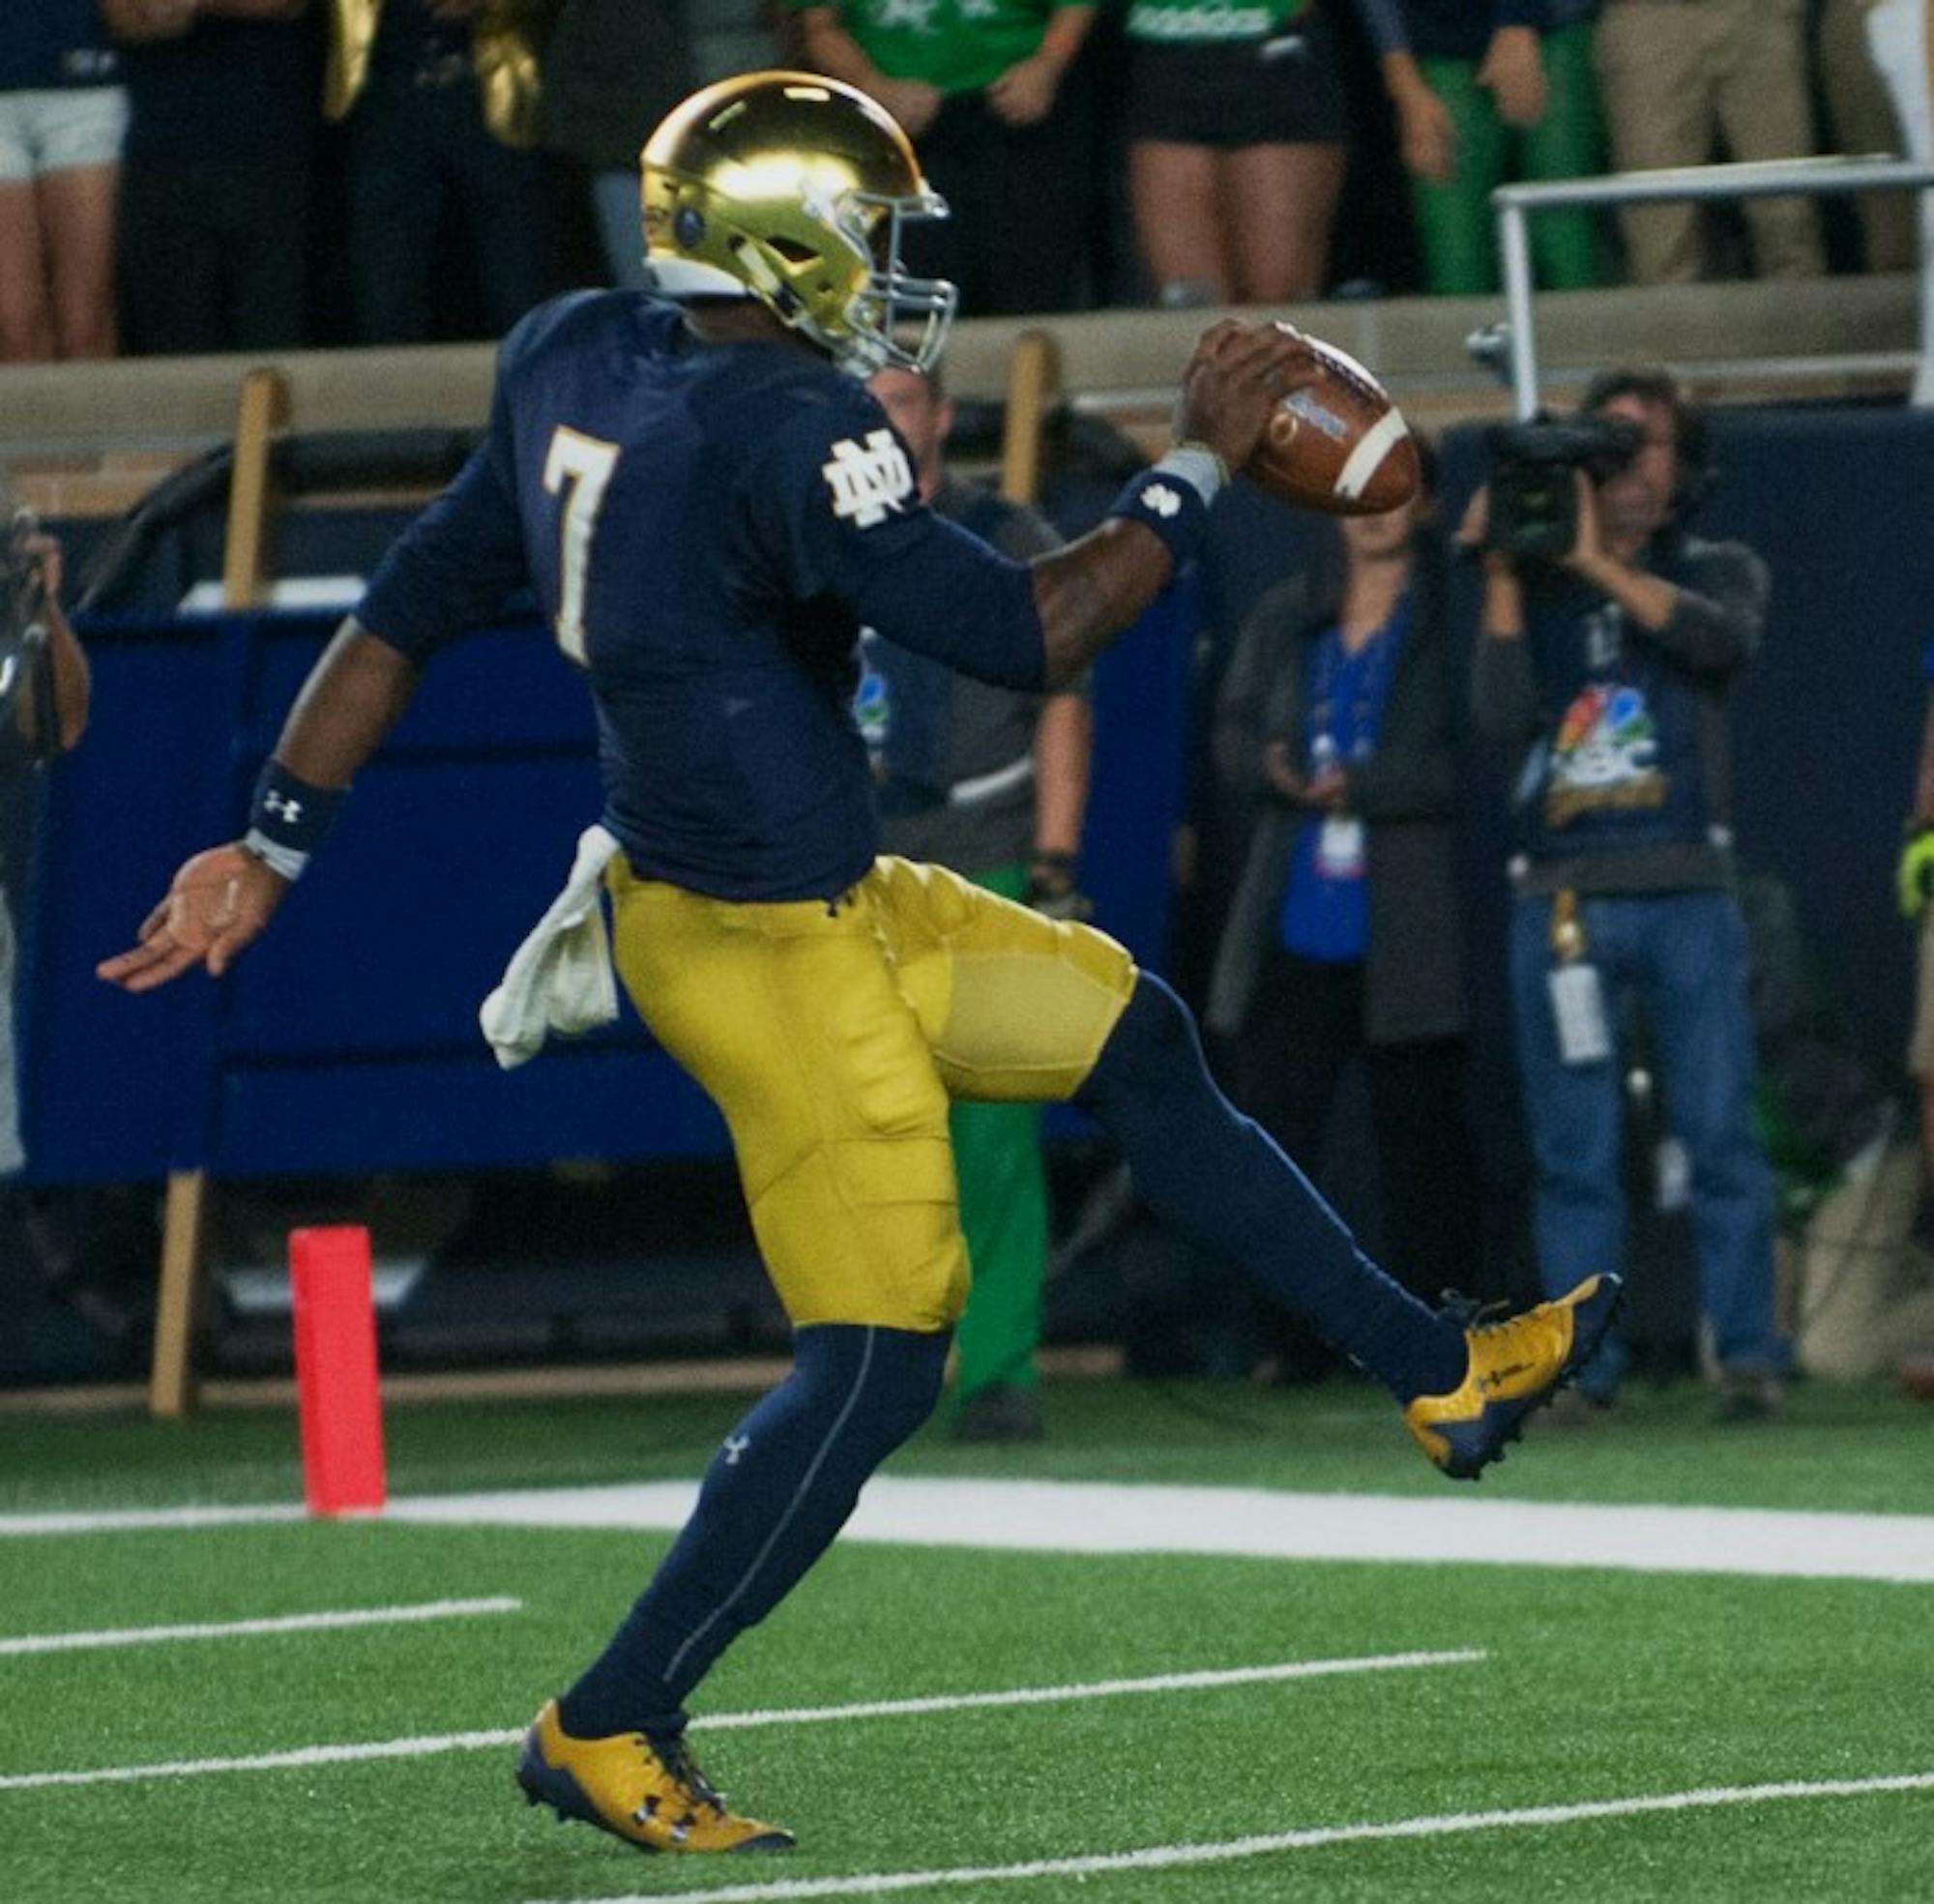 Irish junior quarterback Brandon Wimbush scampers into the endzone after a touchdown run during Notre Dame's 49-14 win over USC on Saturday.